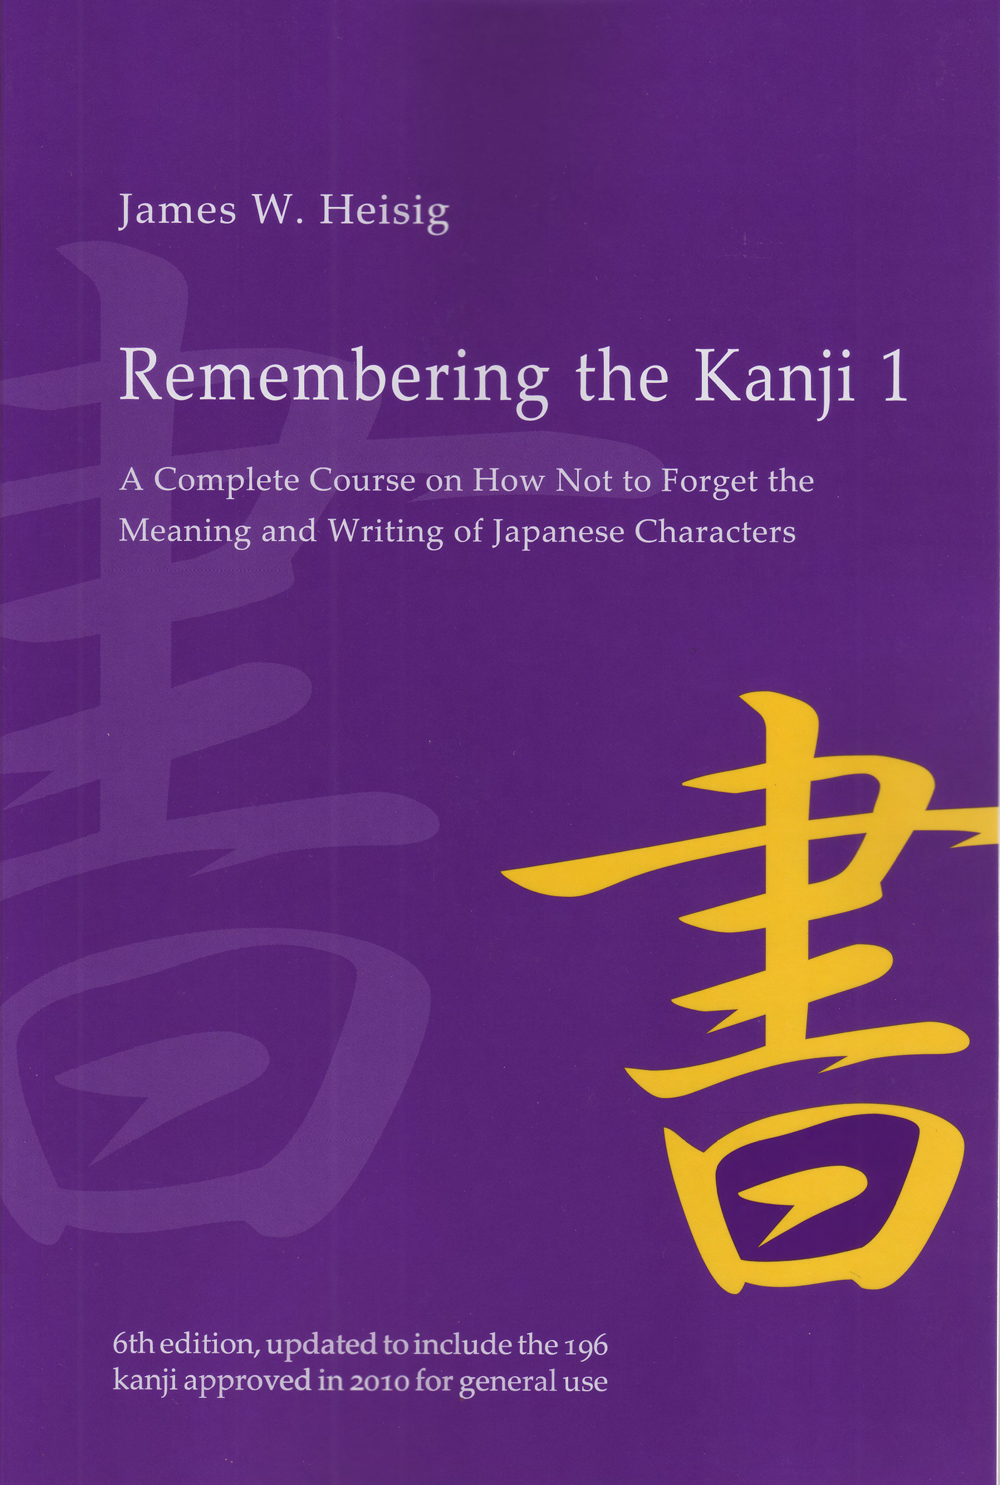 Remembering The Kanji by James W. Heisig